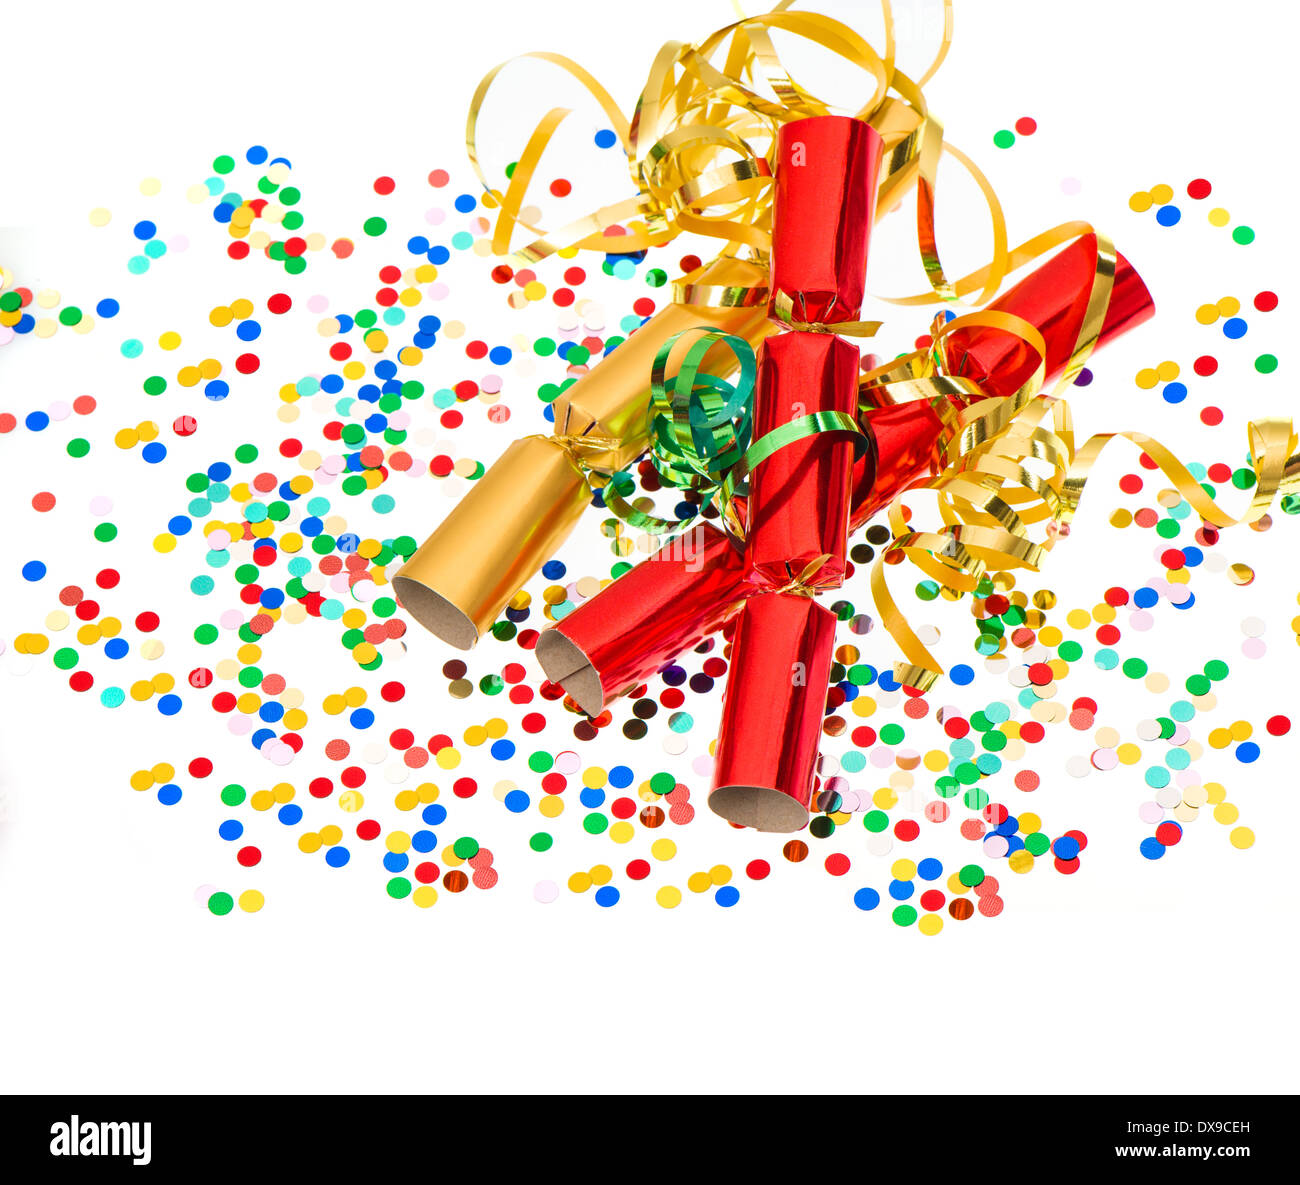 party cracker, golden streamer and confetti over white. festive decoration background Stock Photo